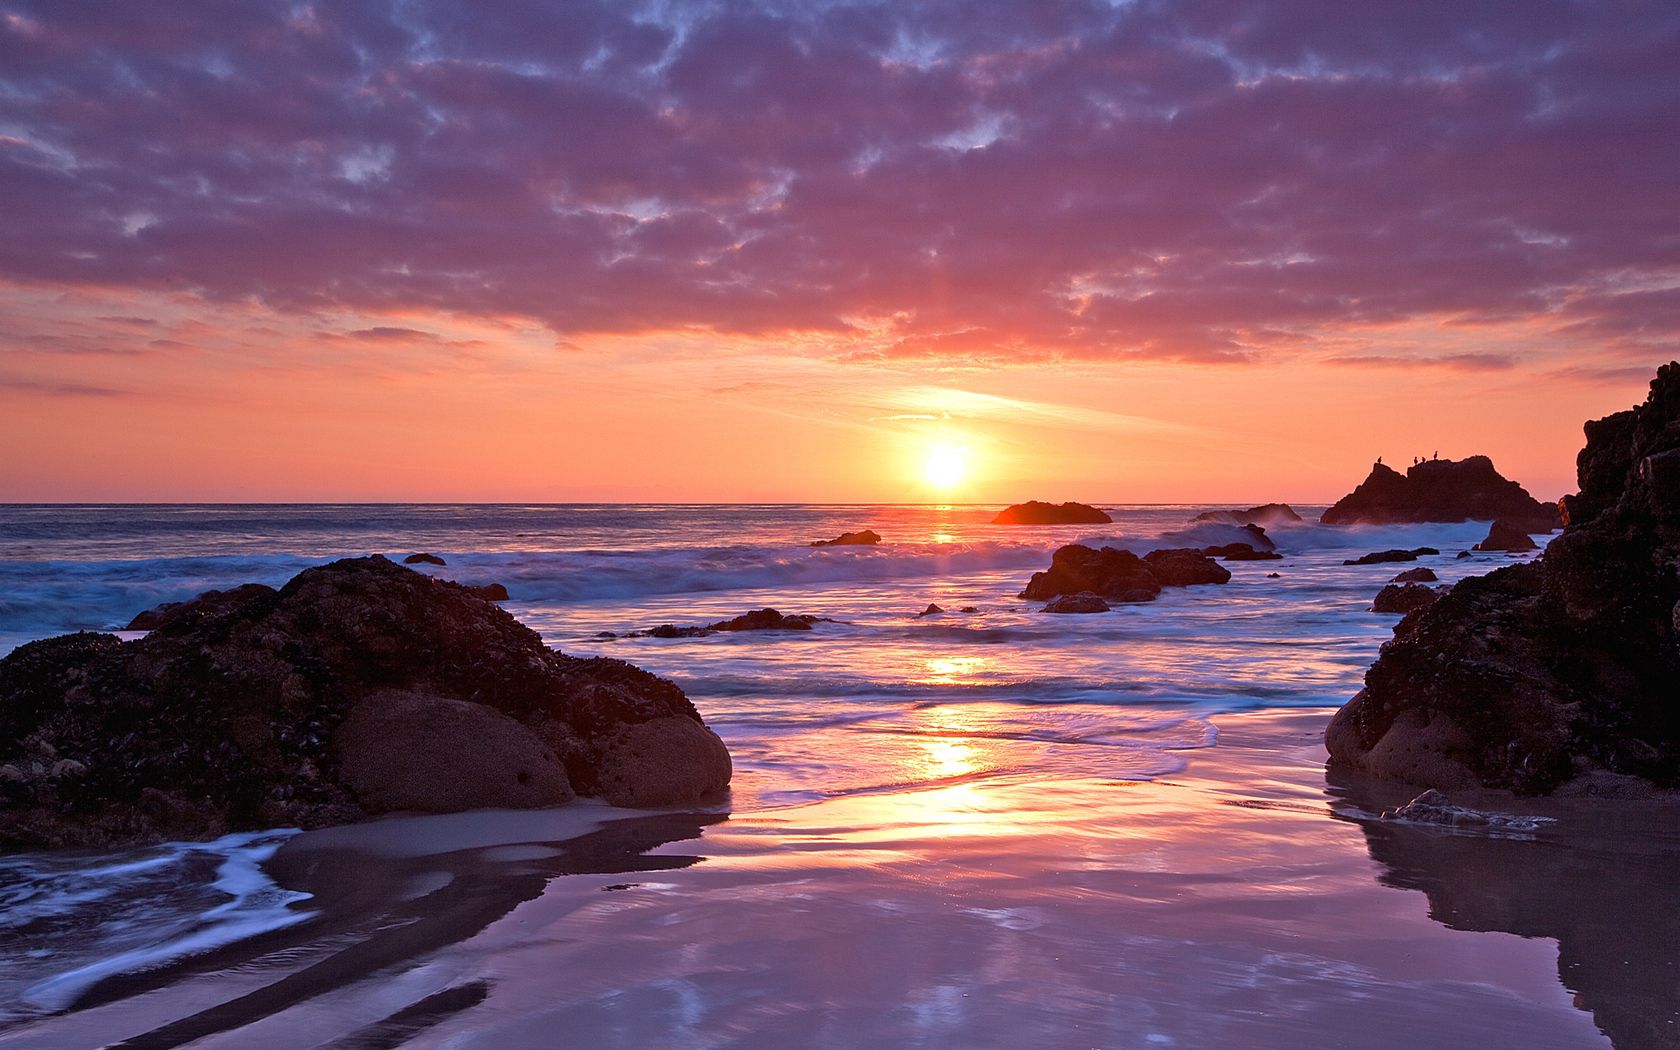 136916 download wallpaper nature, sunset, stones, sea, sun, horizon, shore, bank, romance screensavers and pictures for free